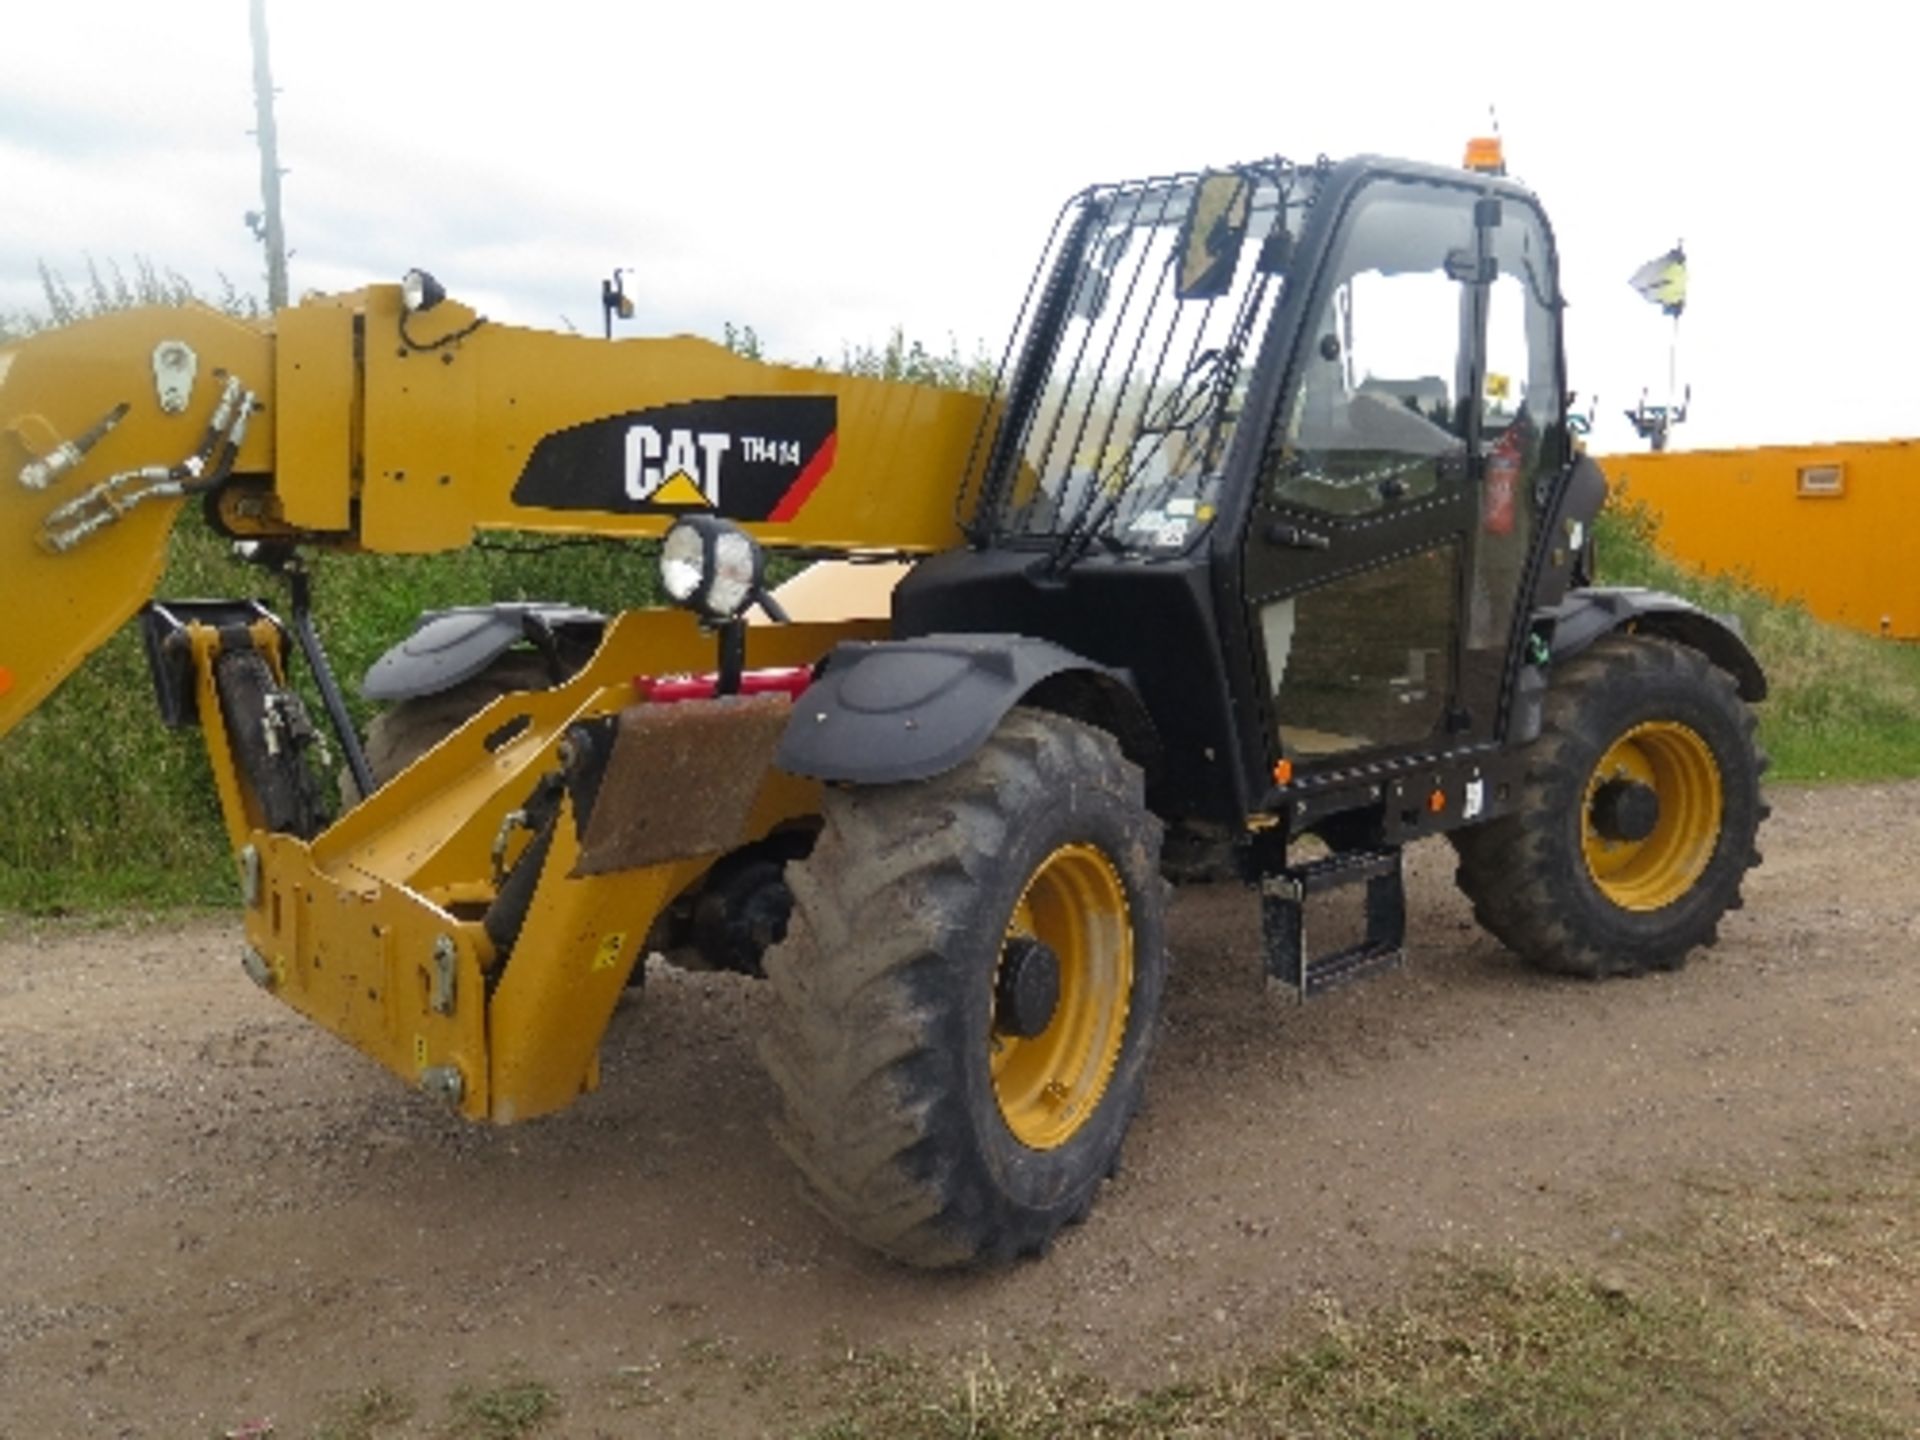 Caterpillar TH414STDQ telehandler 2347 hrs 2013 TBZ00905
This lot is included by kind permission of - Image 2 of 7